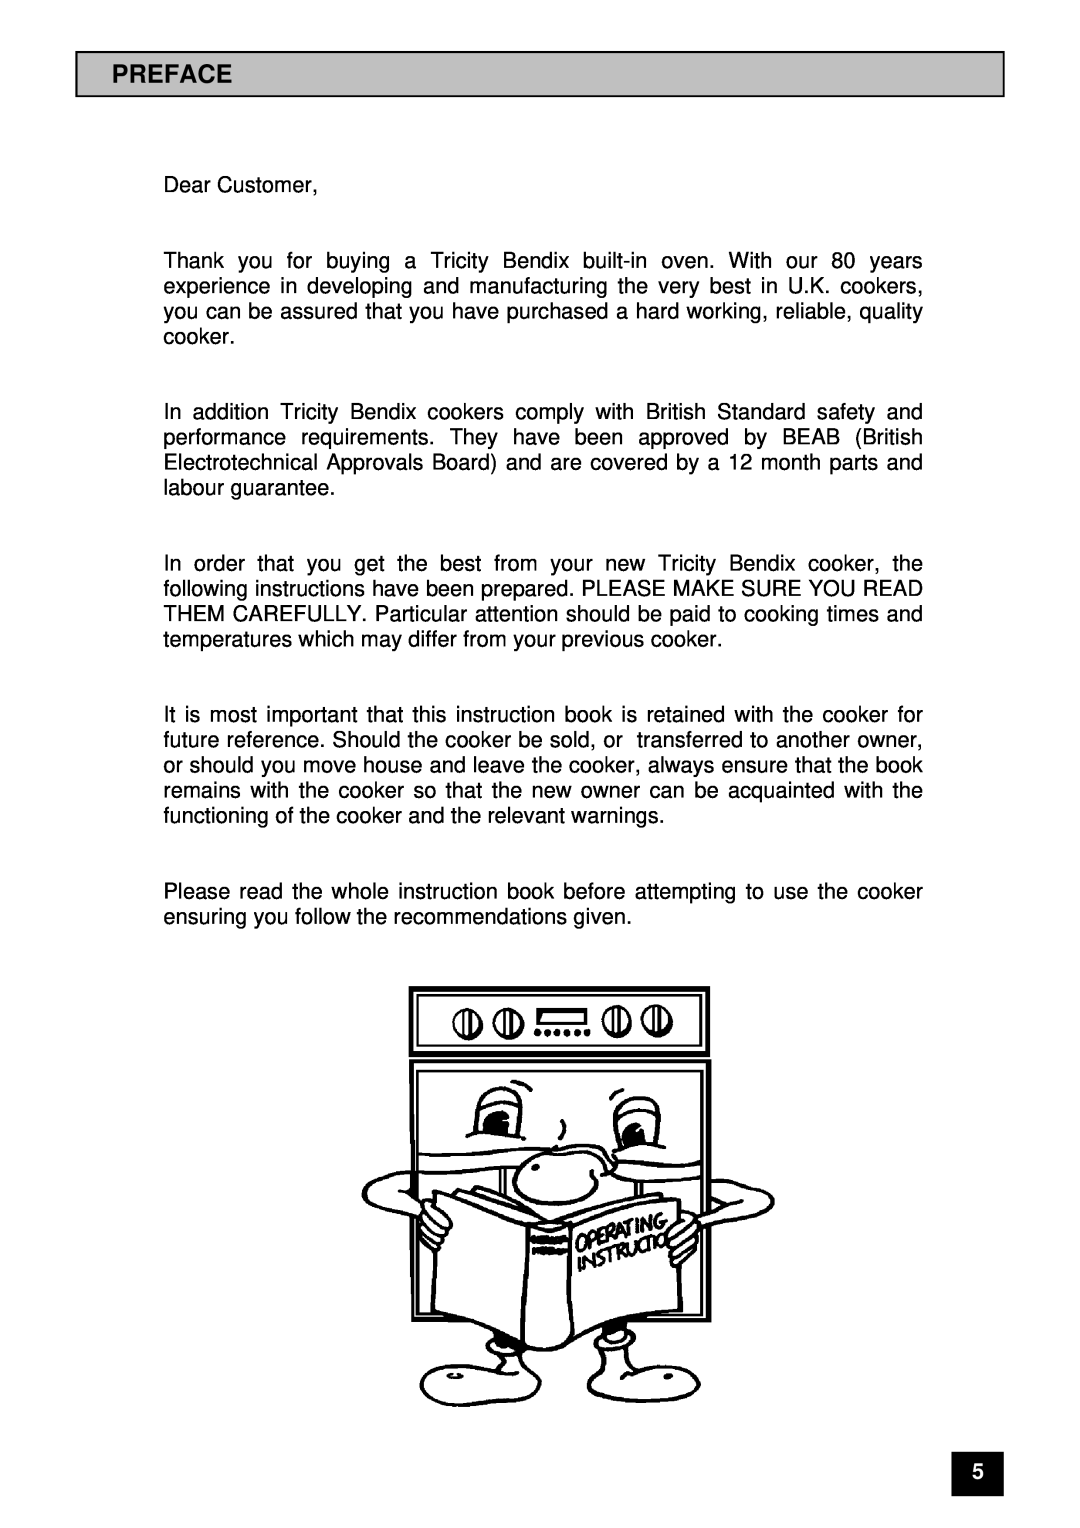 Tricity Bendix BS 631/2 installation instructions Preface 